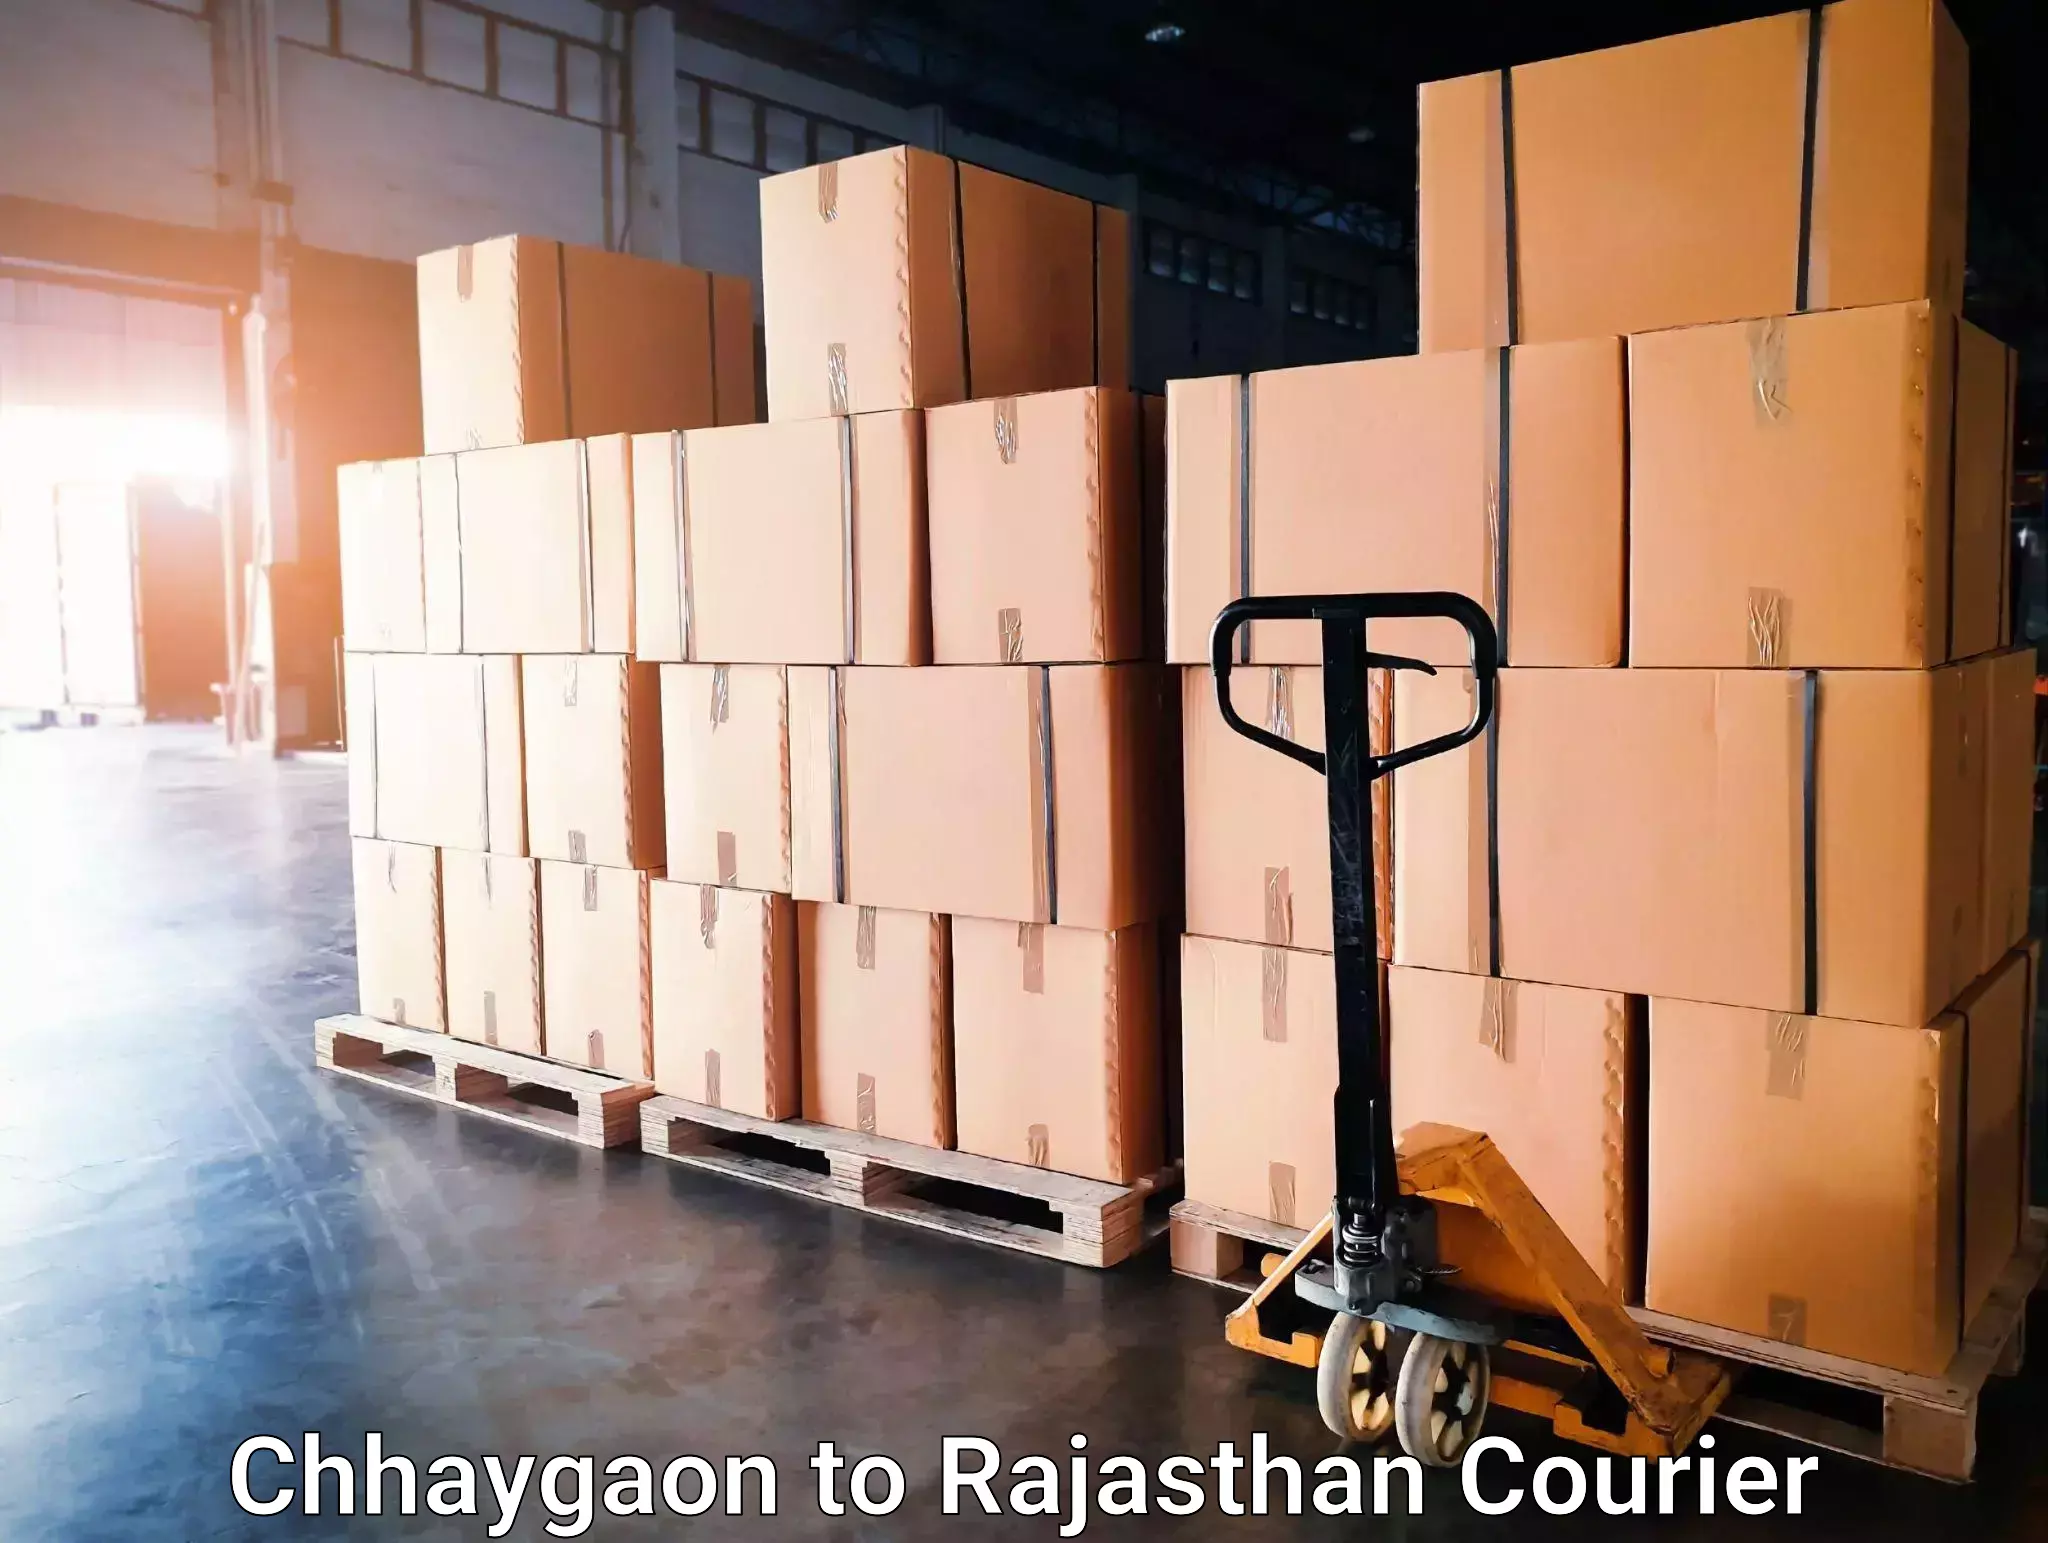 Advanced tracking systems in Chhaygaon to Rajasthan